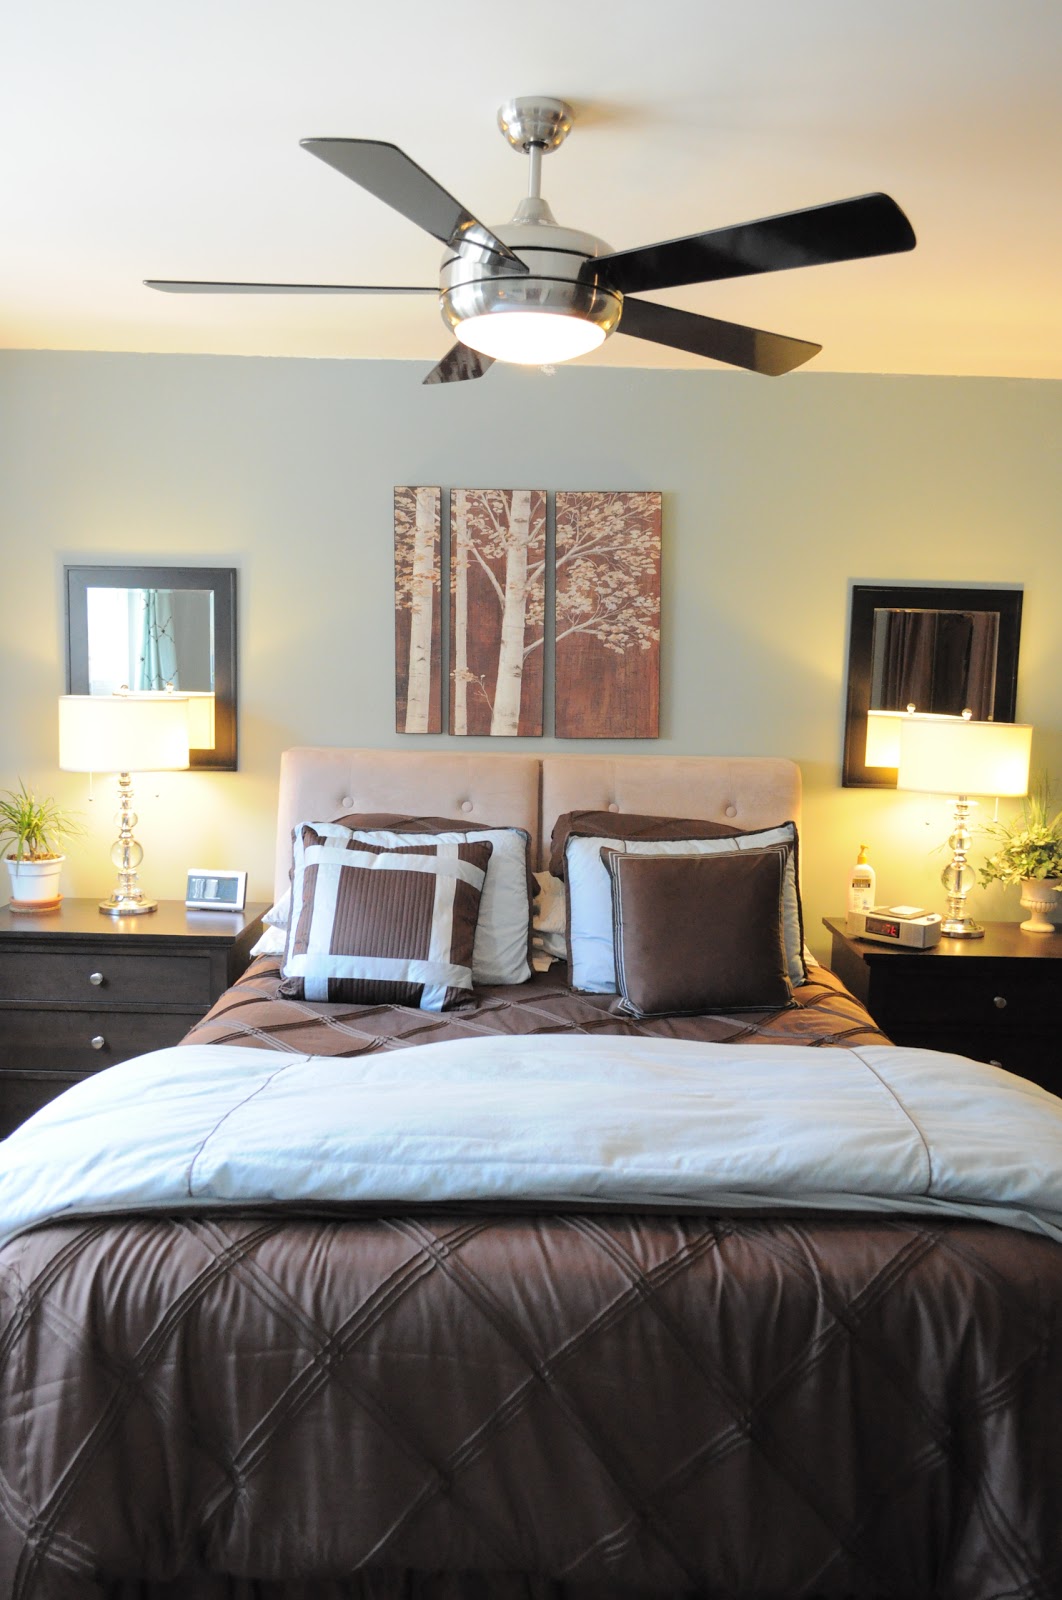 Our Master Bedroom Tricks To Make It Feel Bigger Organized